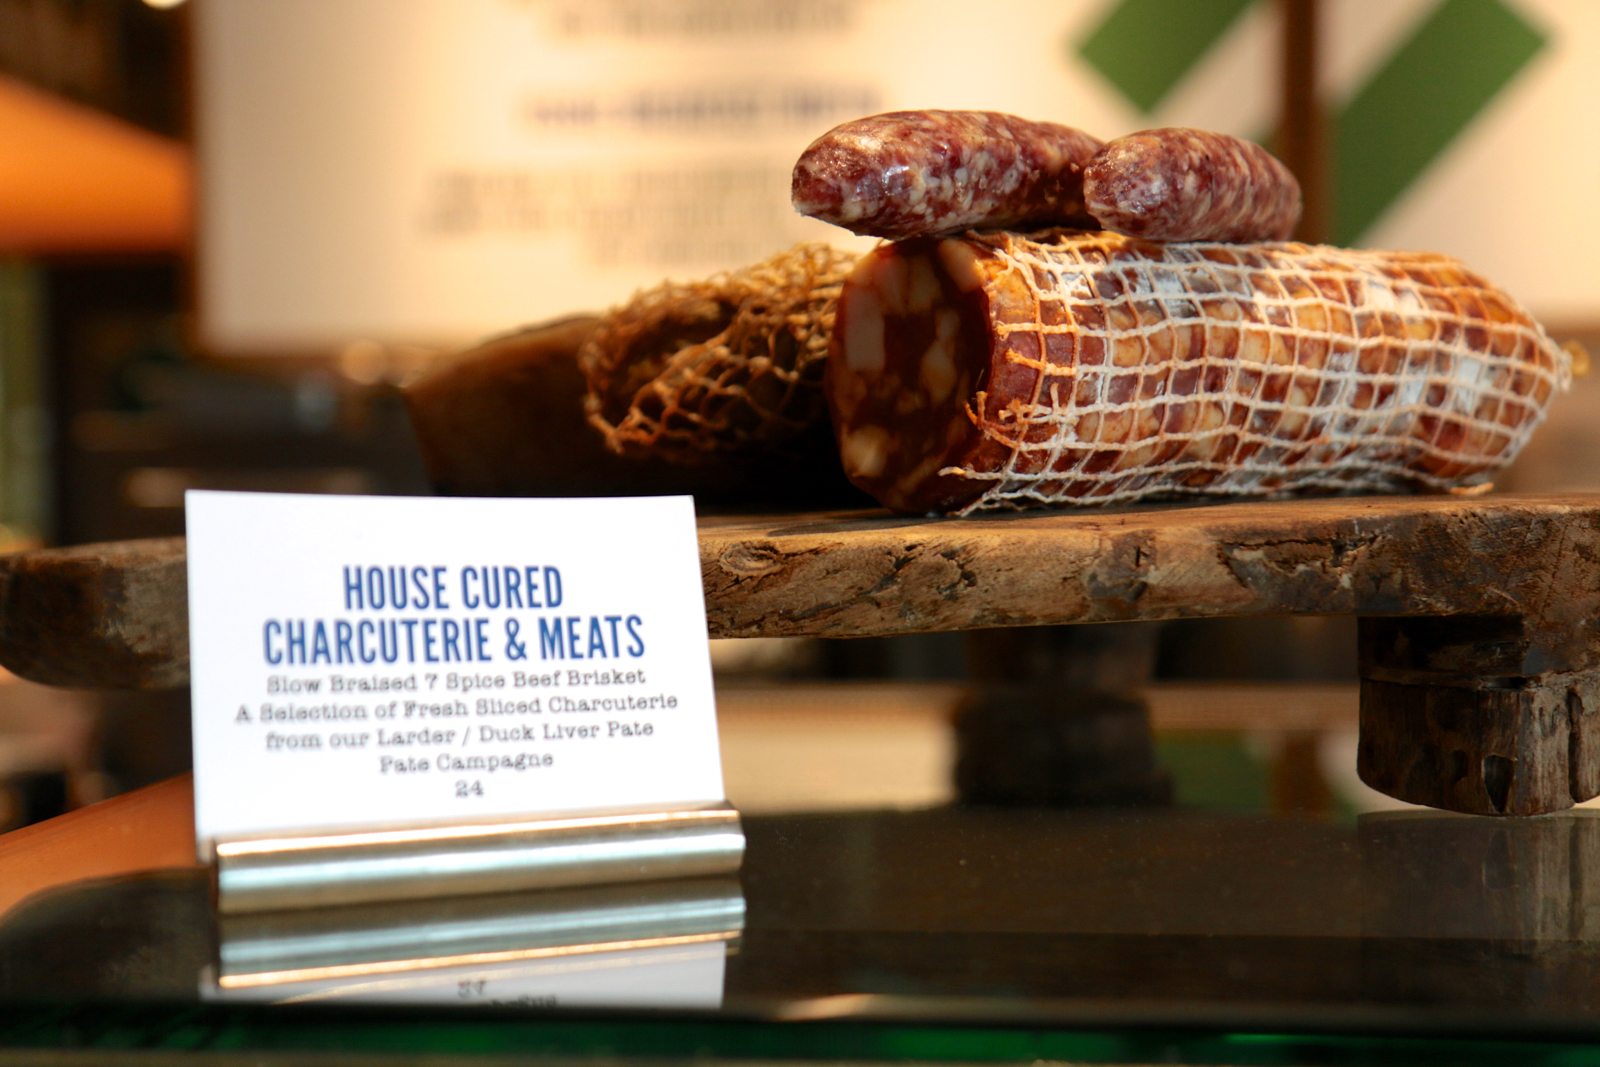 Charcuterie is cured in-house.